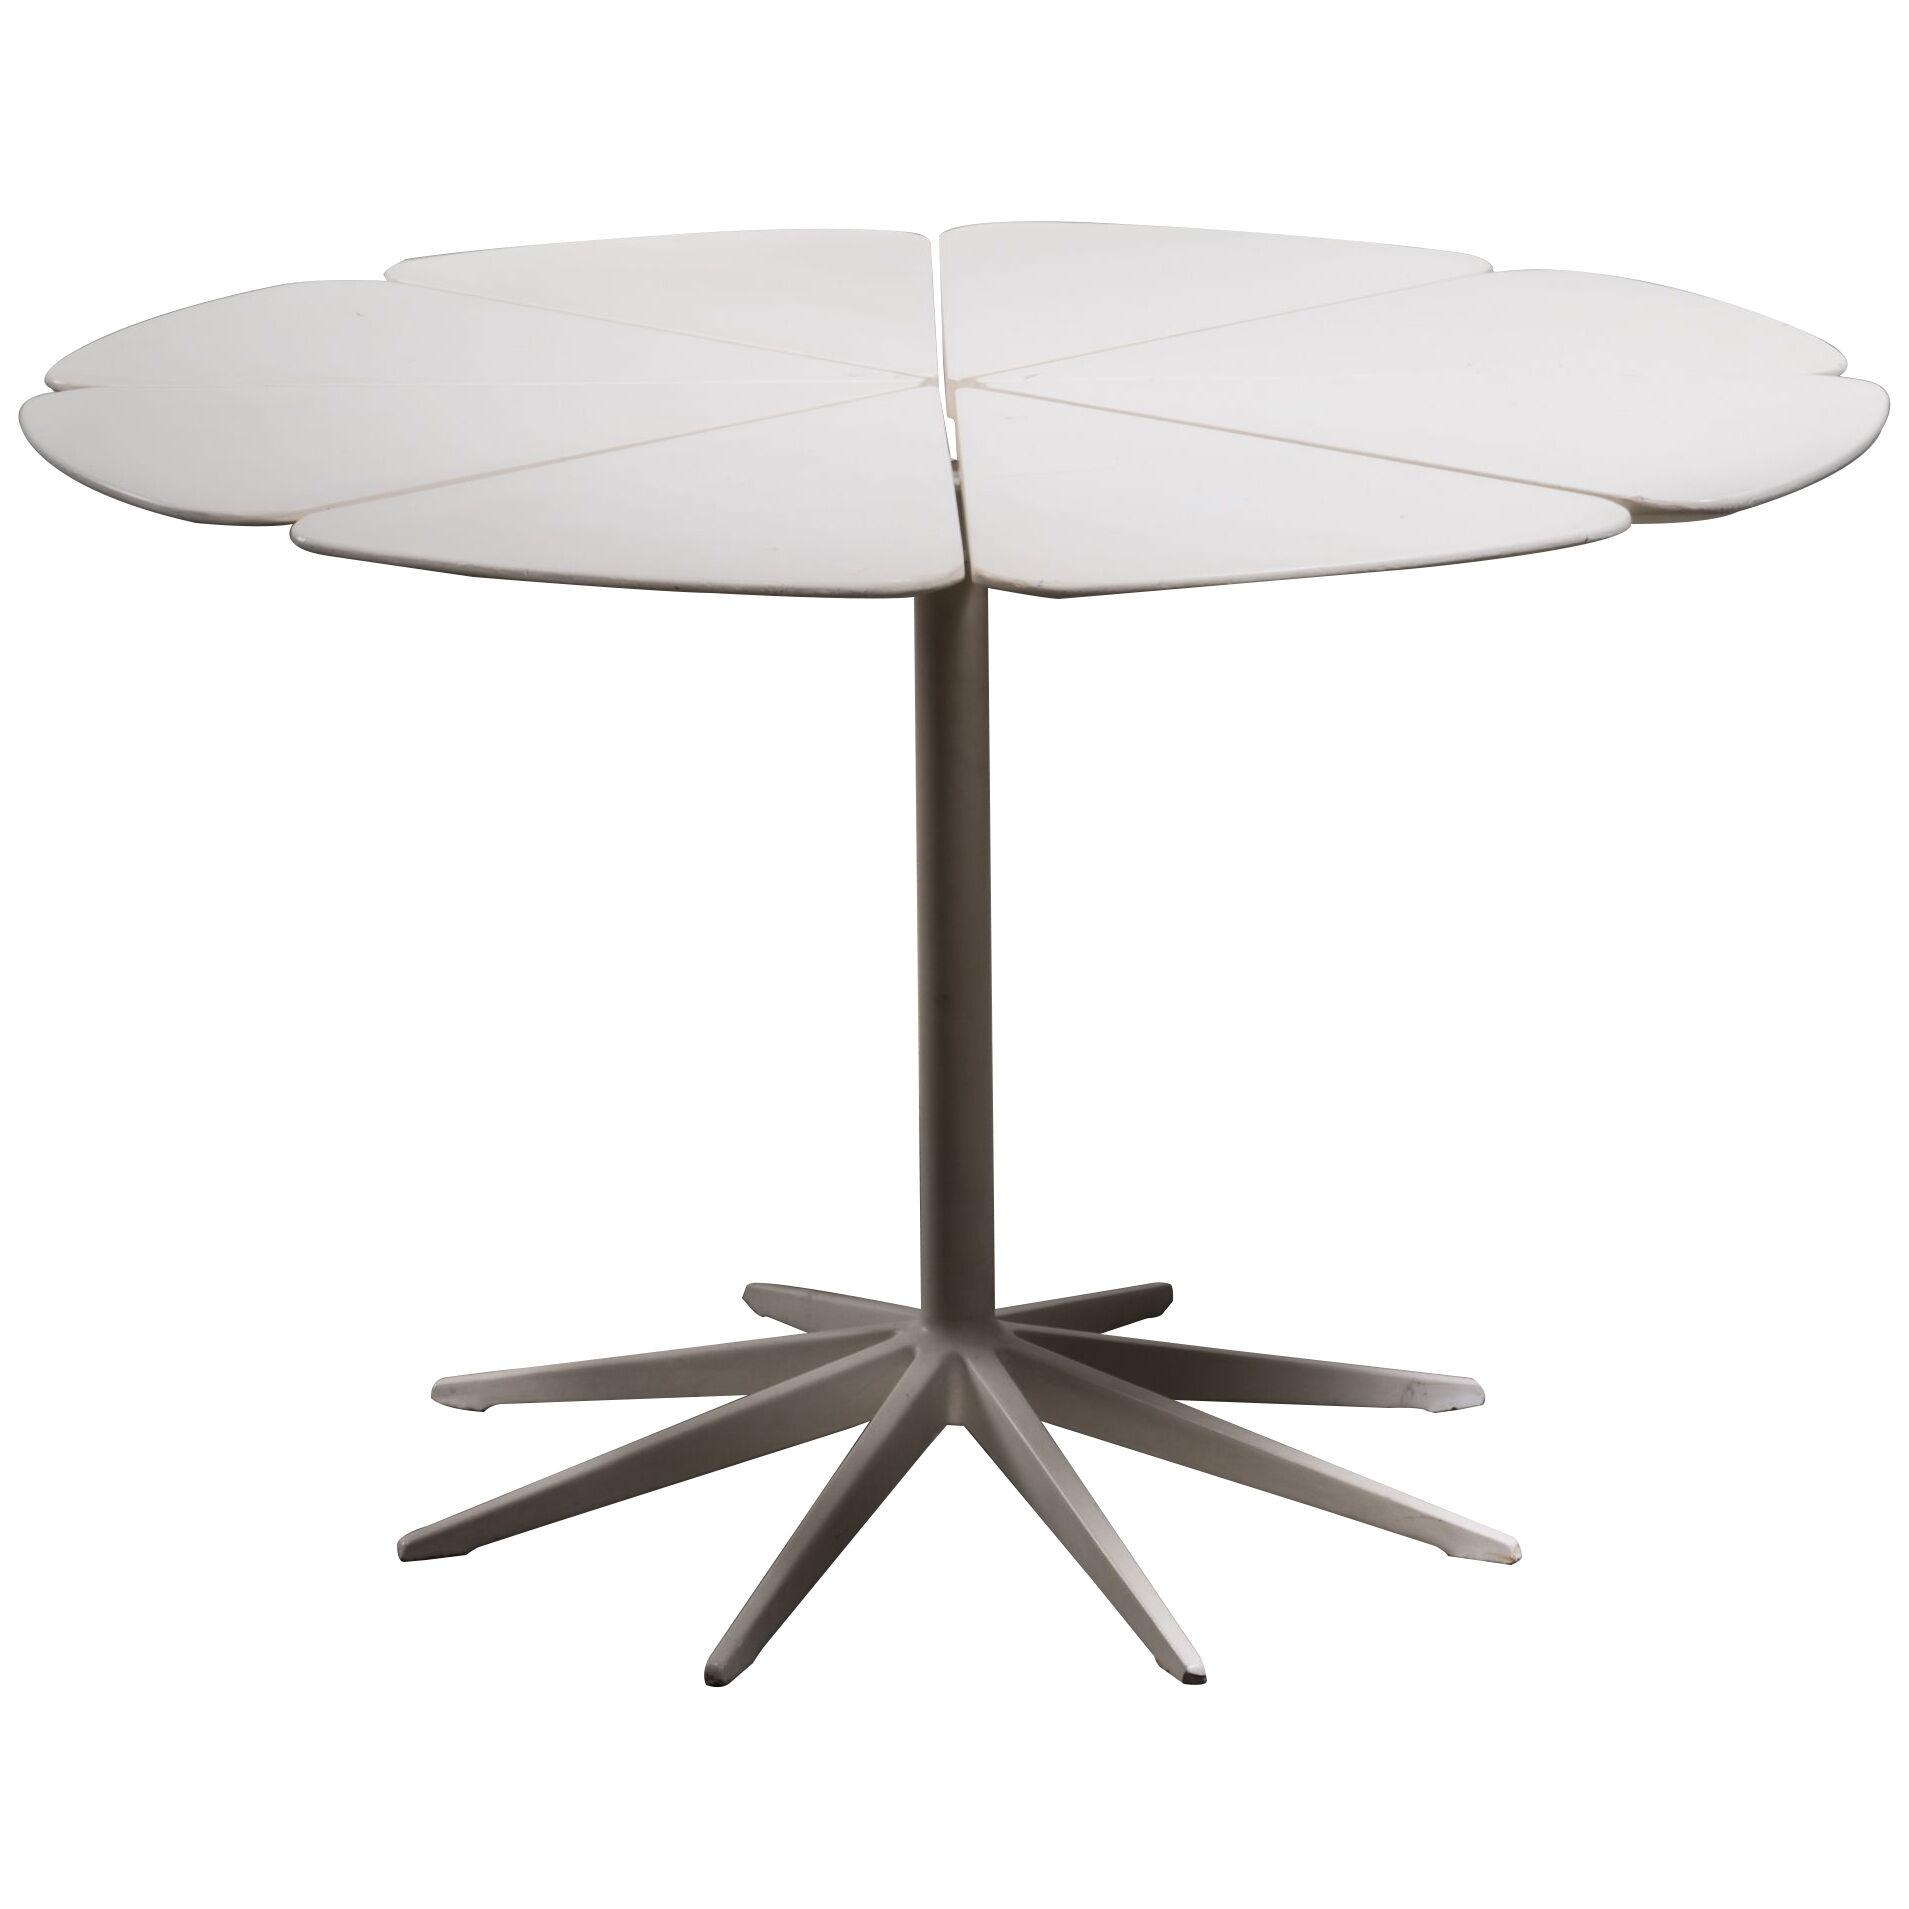 Richard Schultz Petal Dining Table in White for Knoll, USA, 1960s